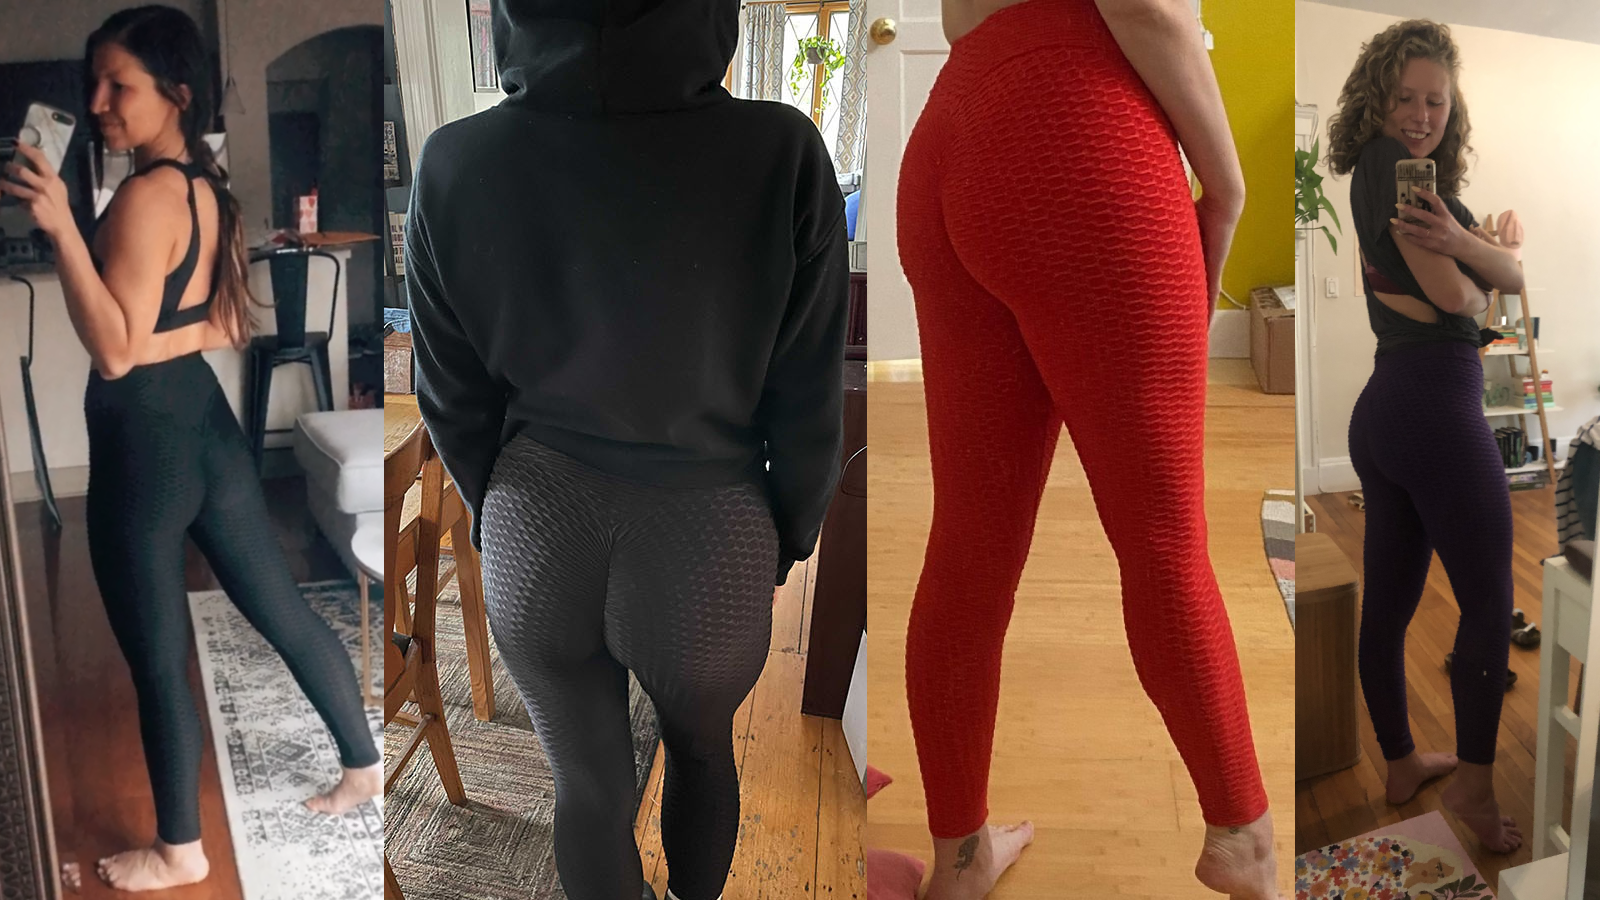 Chubby Teens With Big Asses